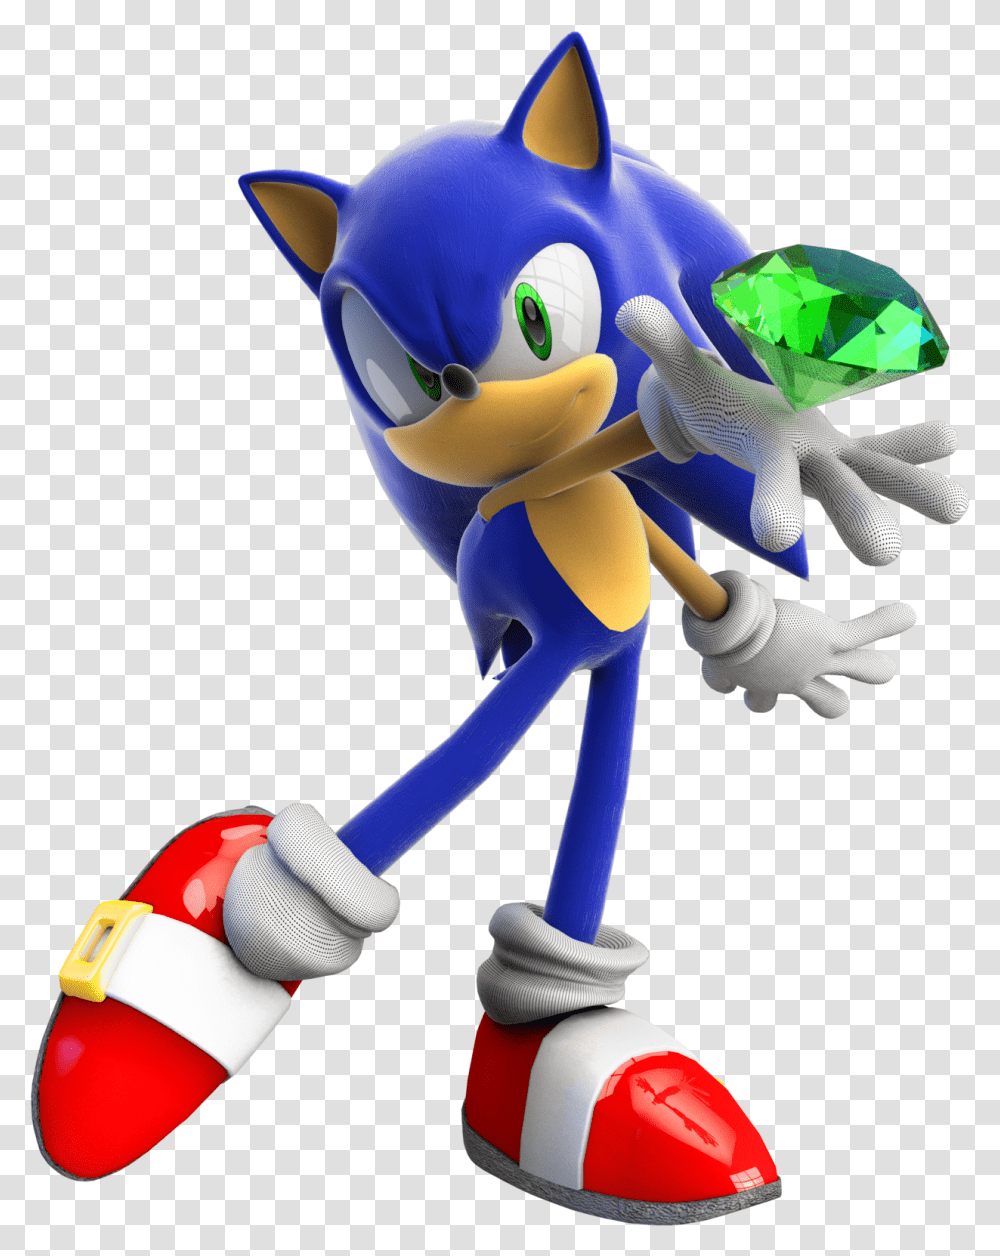 Sonic Chaos Emerald Sonic With Chaos Emeralds, Toy, Figurine, Super Mario, Mascot Transparent Png